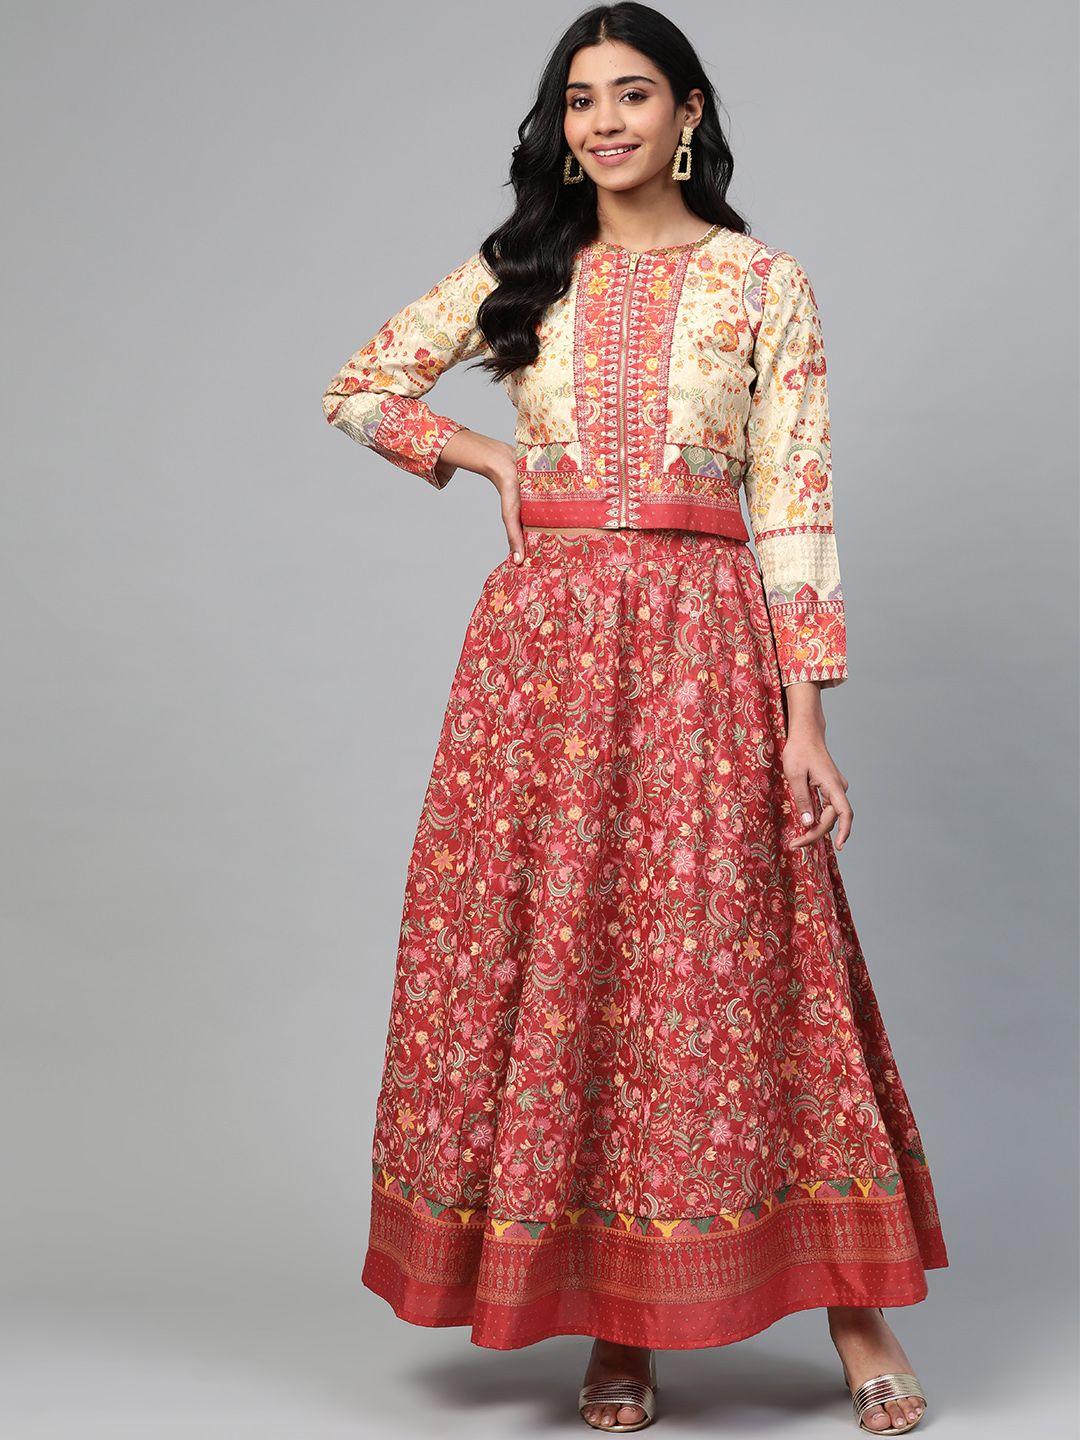 w women red & cream-coloured printed top with skirt